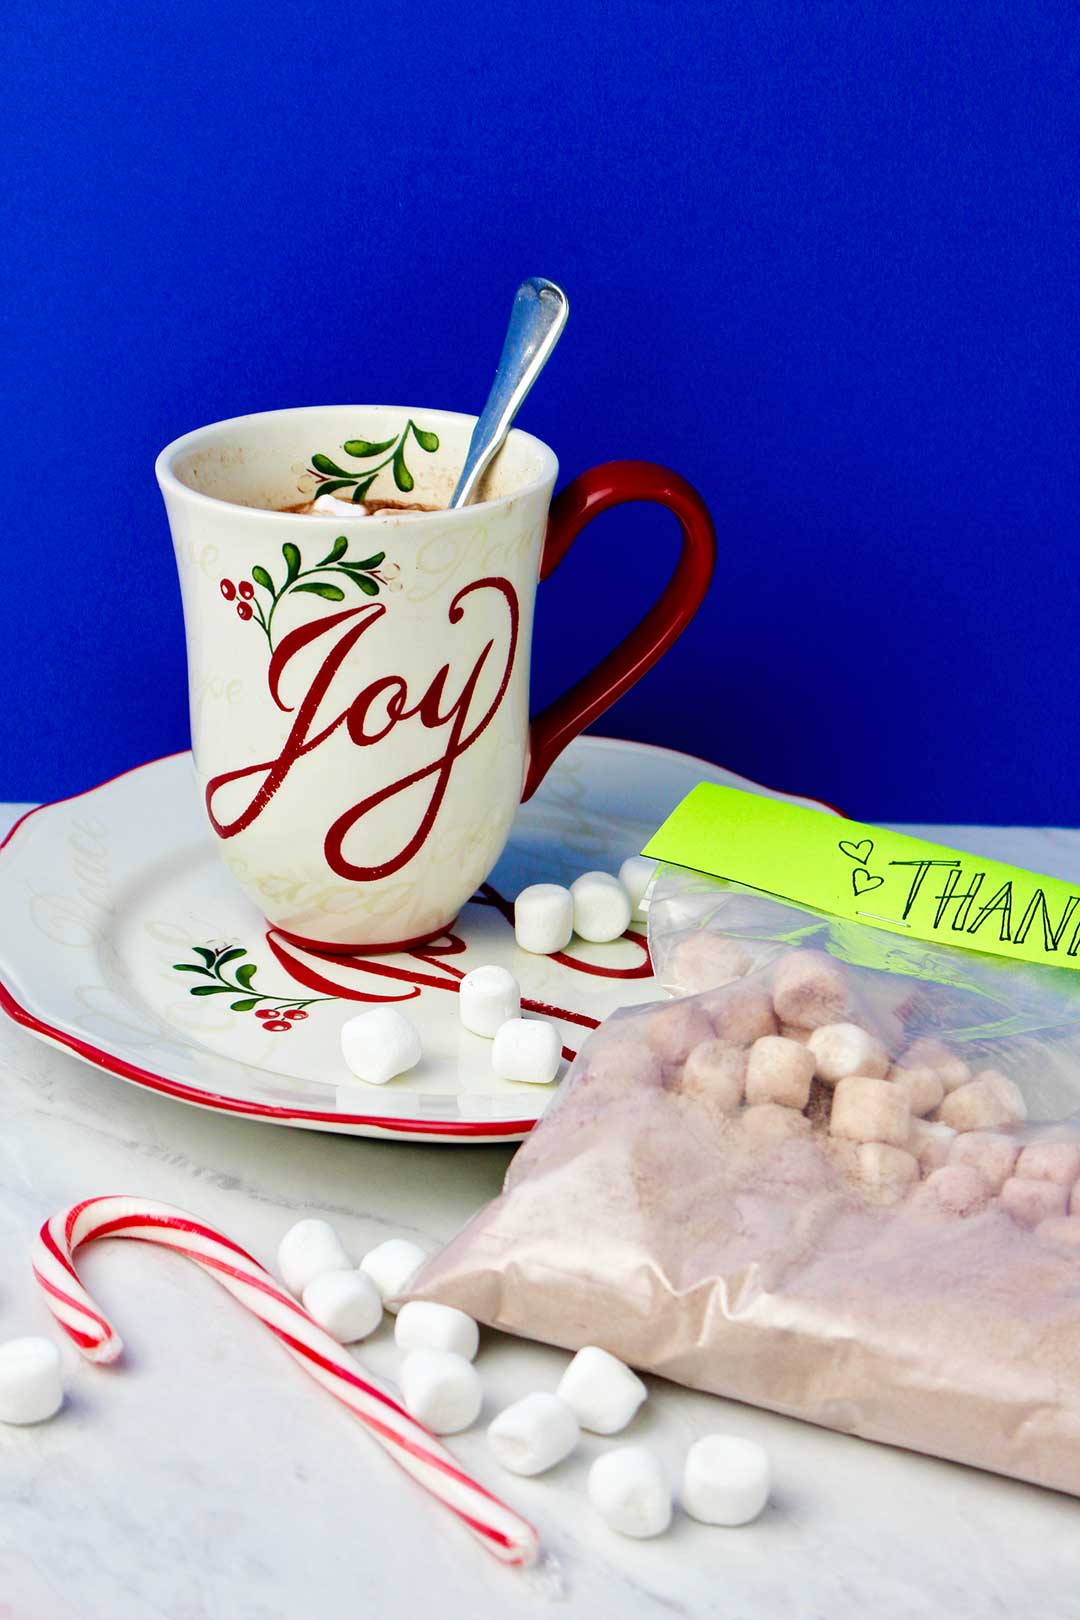 Holiday mug on saucer with marshmallows and bag of hot chocolate mix near by against a royal blue background.